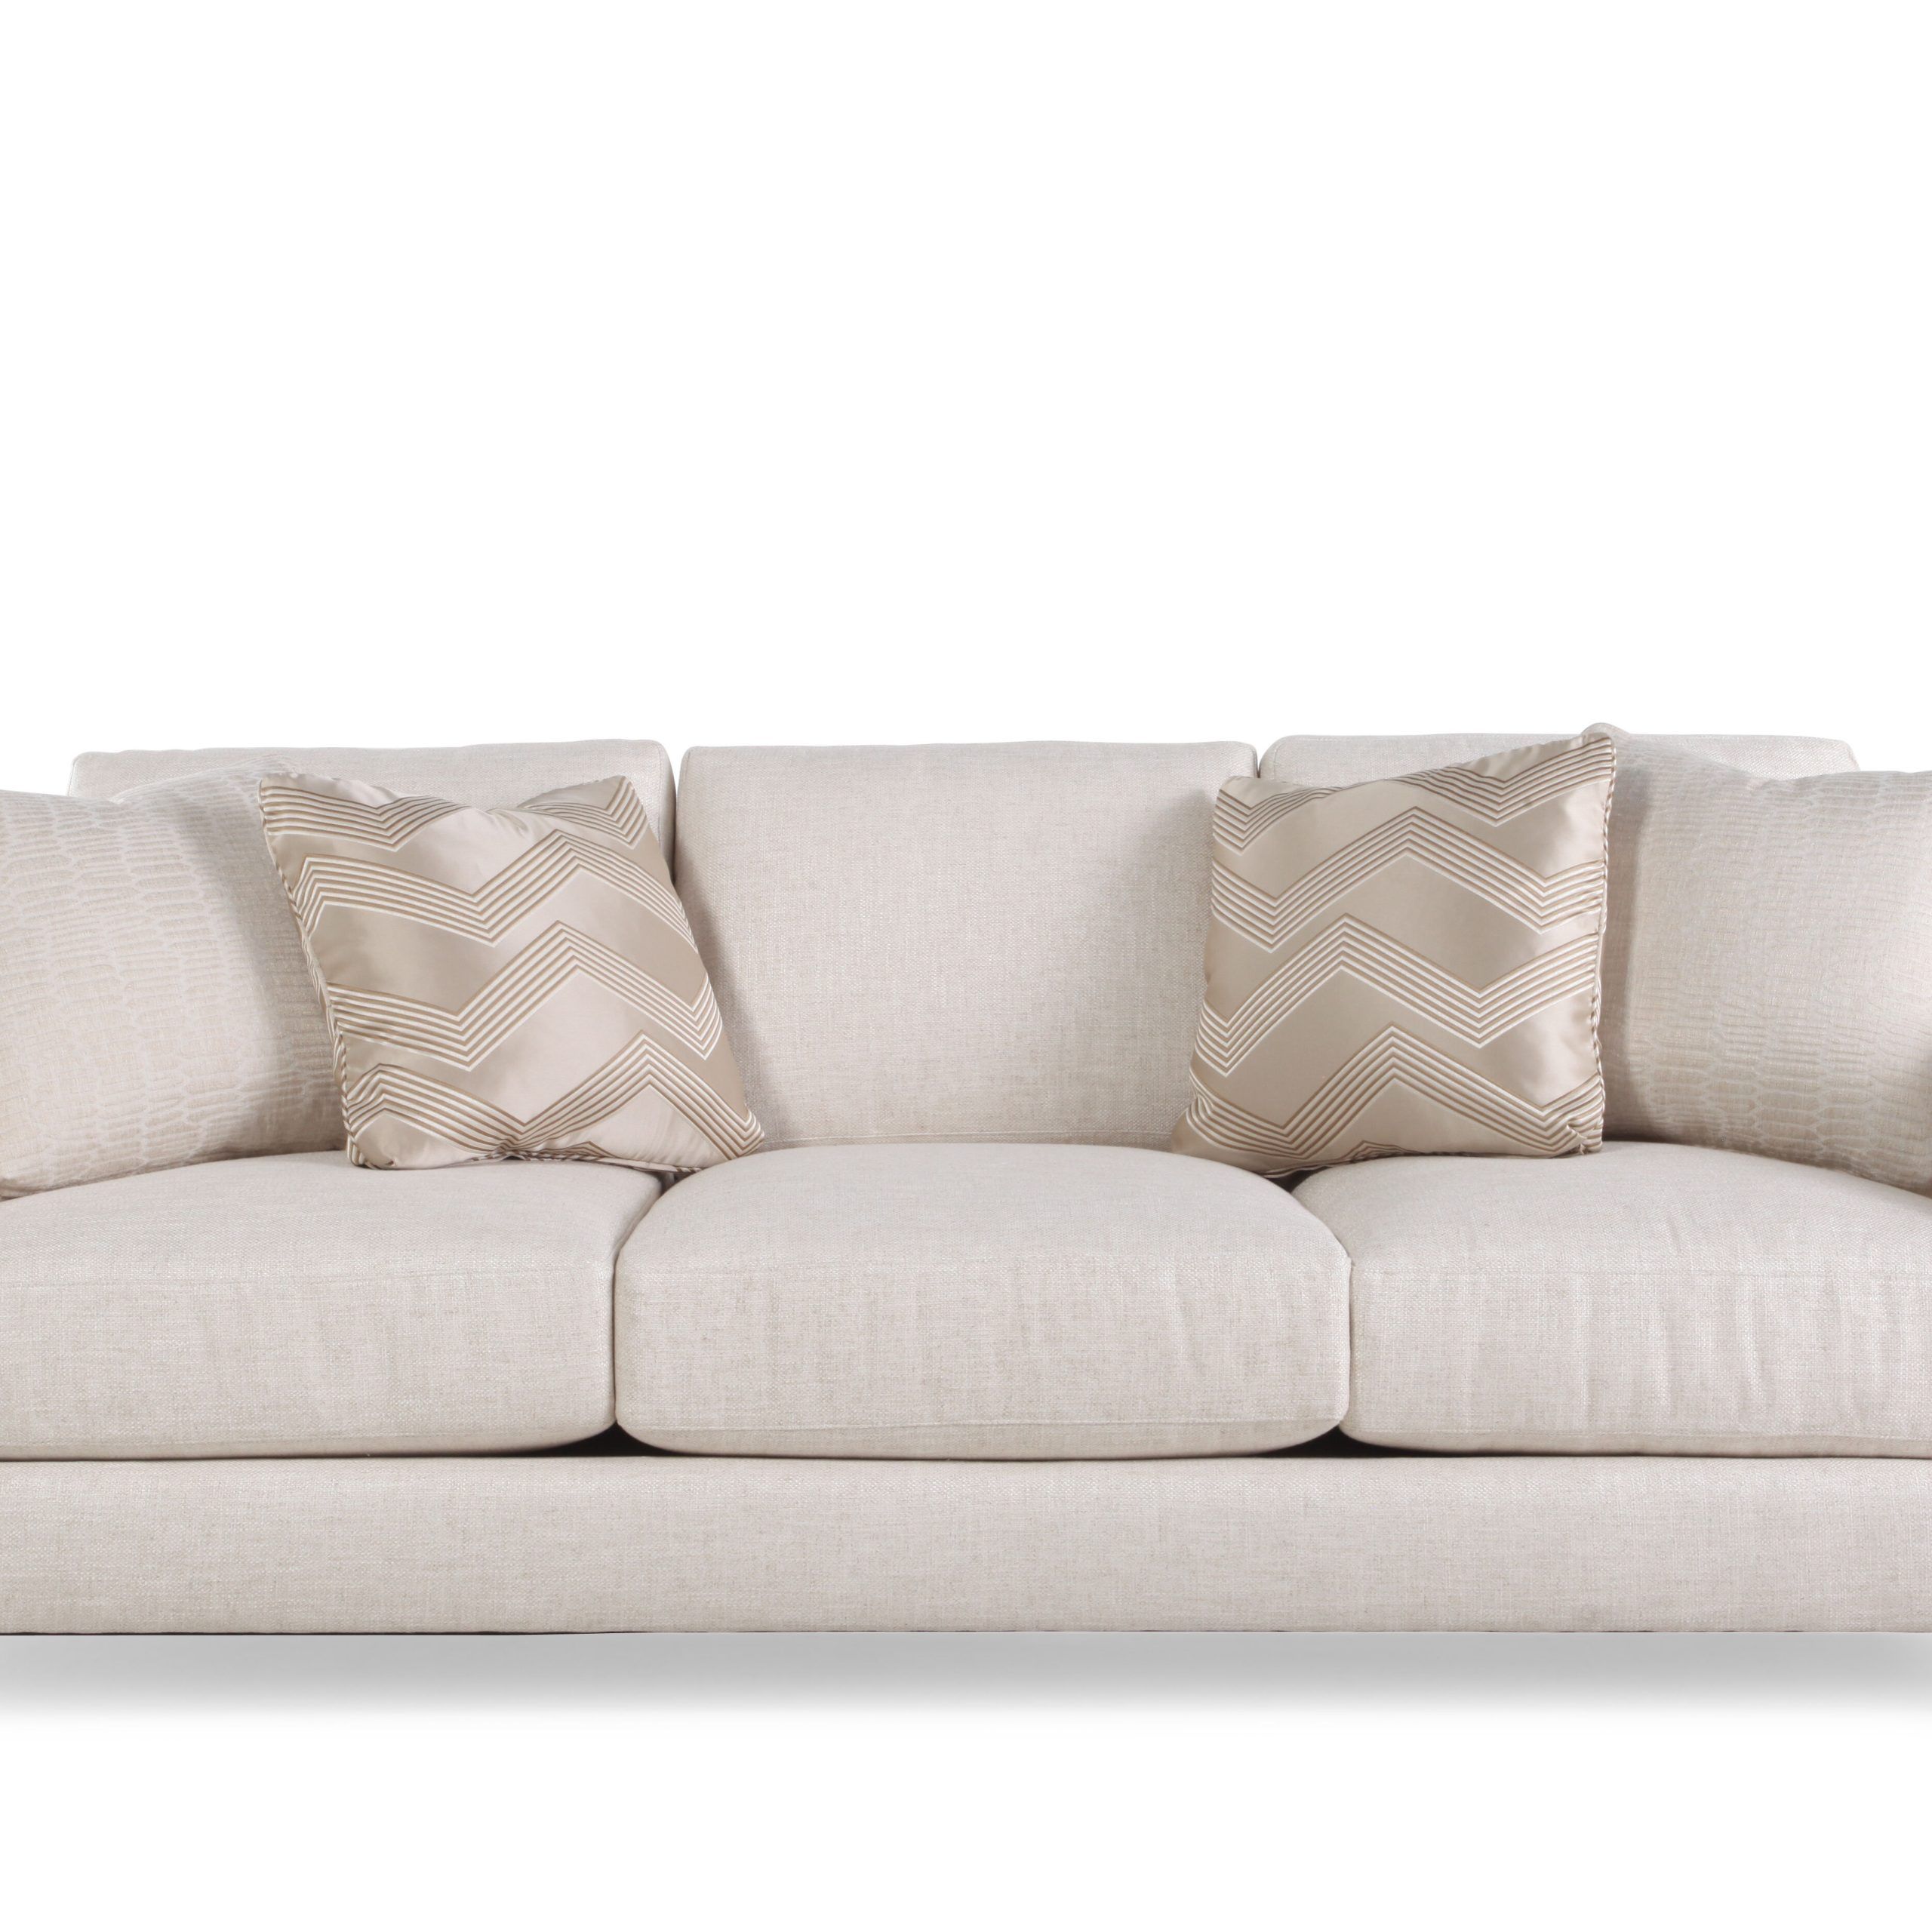 Modern 93.5" Sofa In Cream | Mathis Brothers Furniture Inside Sofas In Cream (Gallery 1 of 20)